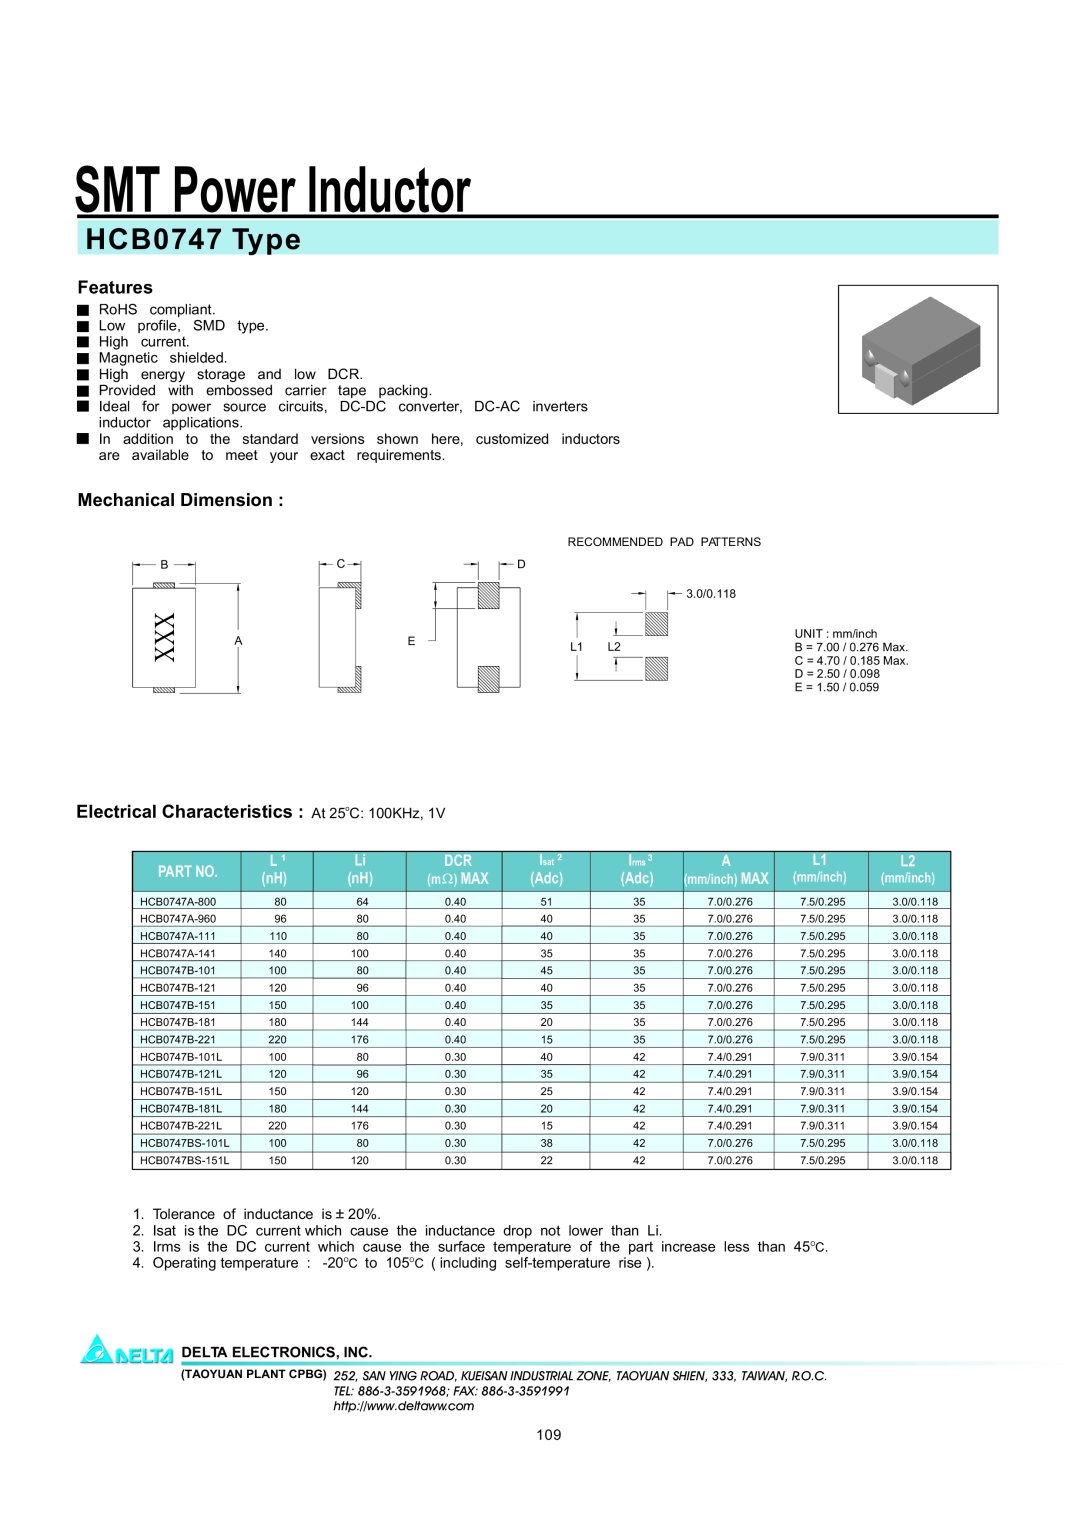 Delta Electronics manual SMT Power Inductor, HCB0747 Type, Features, Mechanical Dimension, Delta Electronics, Inc 